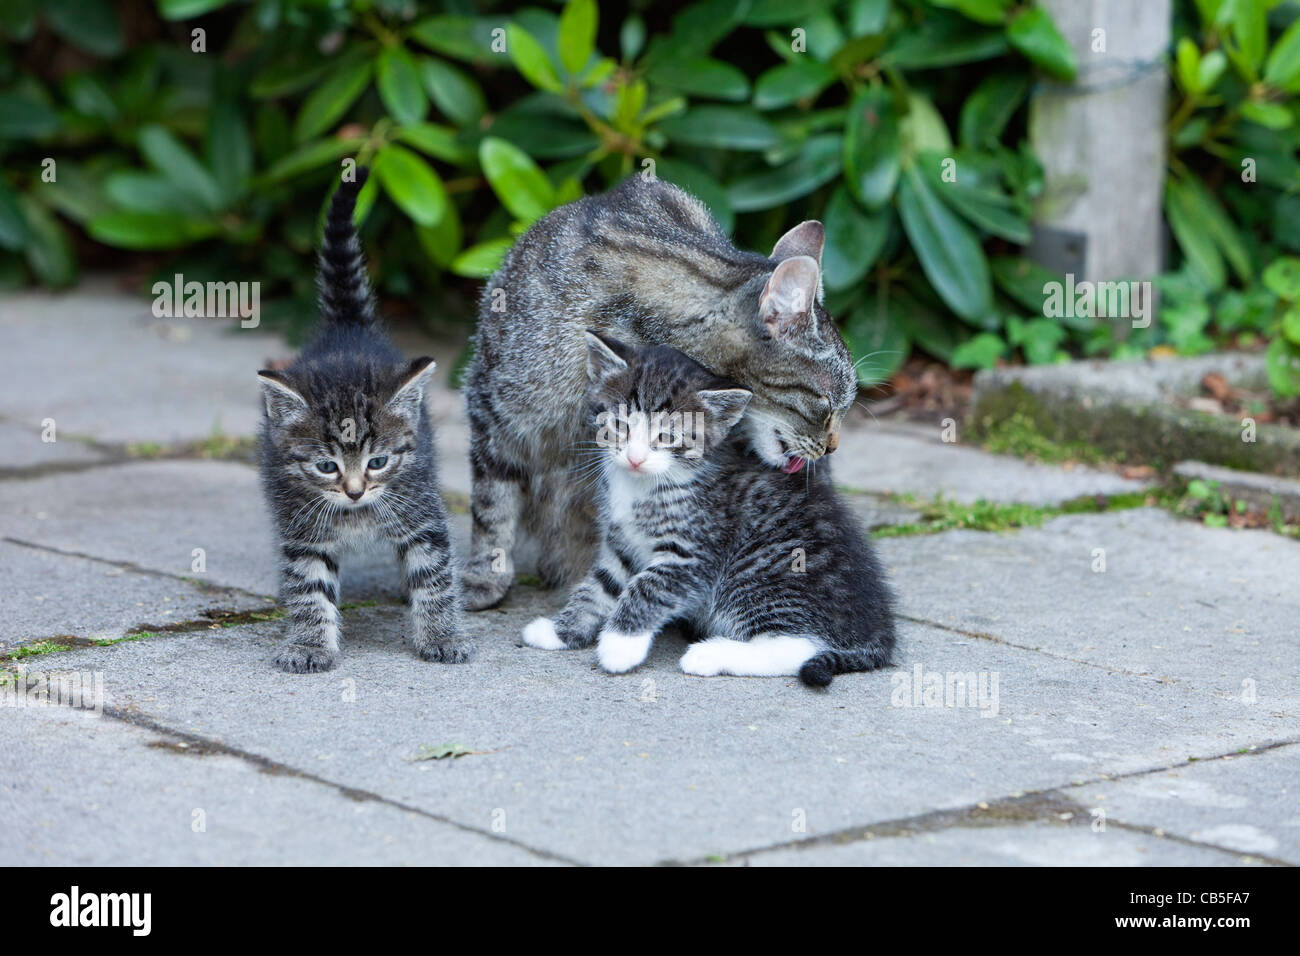 Cat cleaning kittens, outdoors in garden, Lower Saxony, Germany Stock Photo